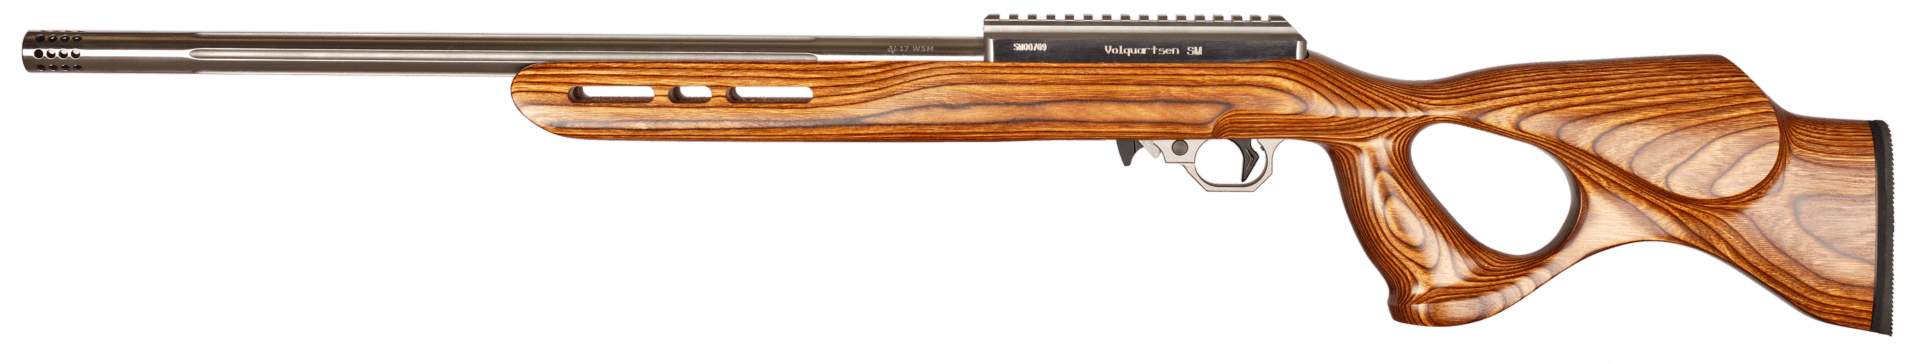 1602-17 wsm deluxe, brown th stock.